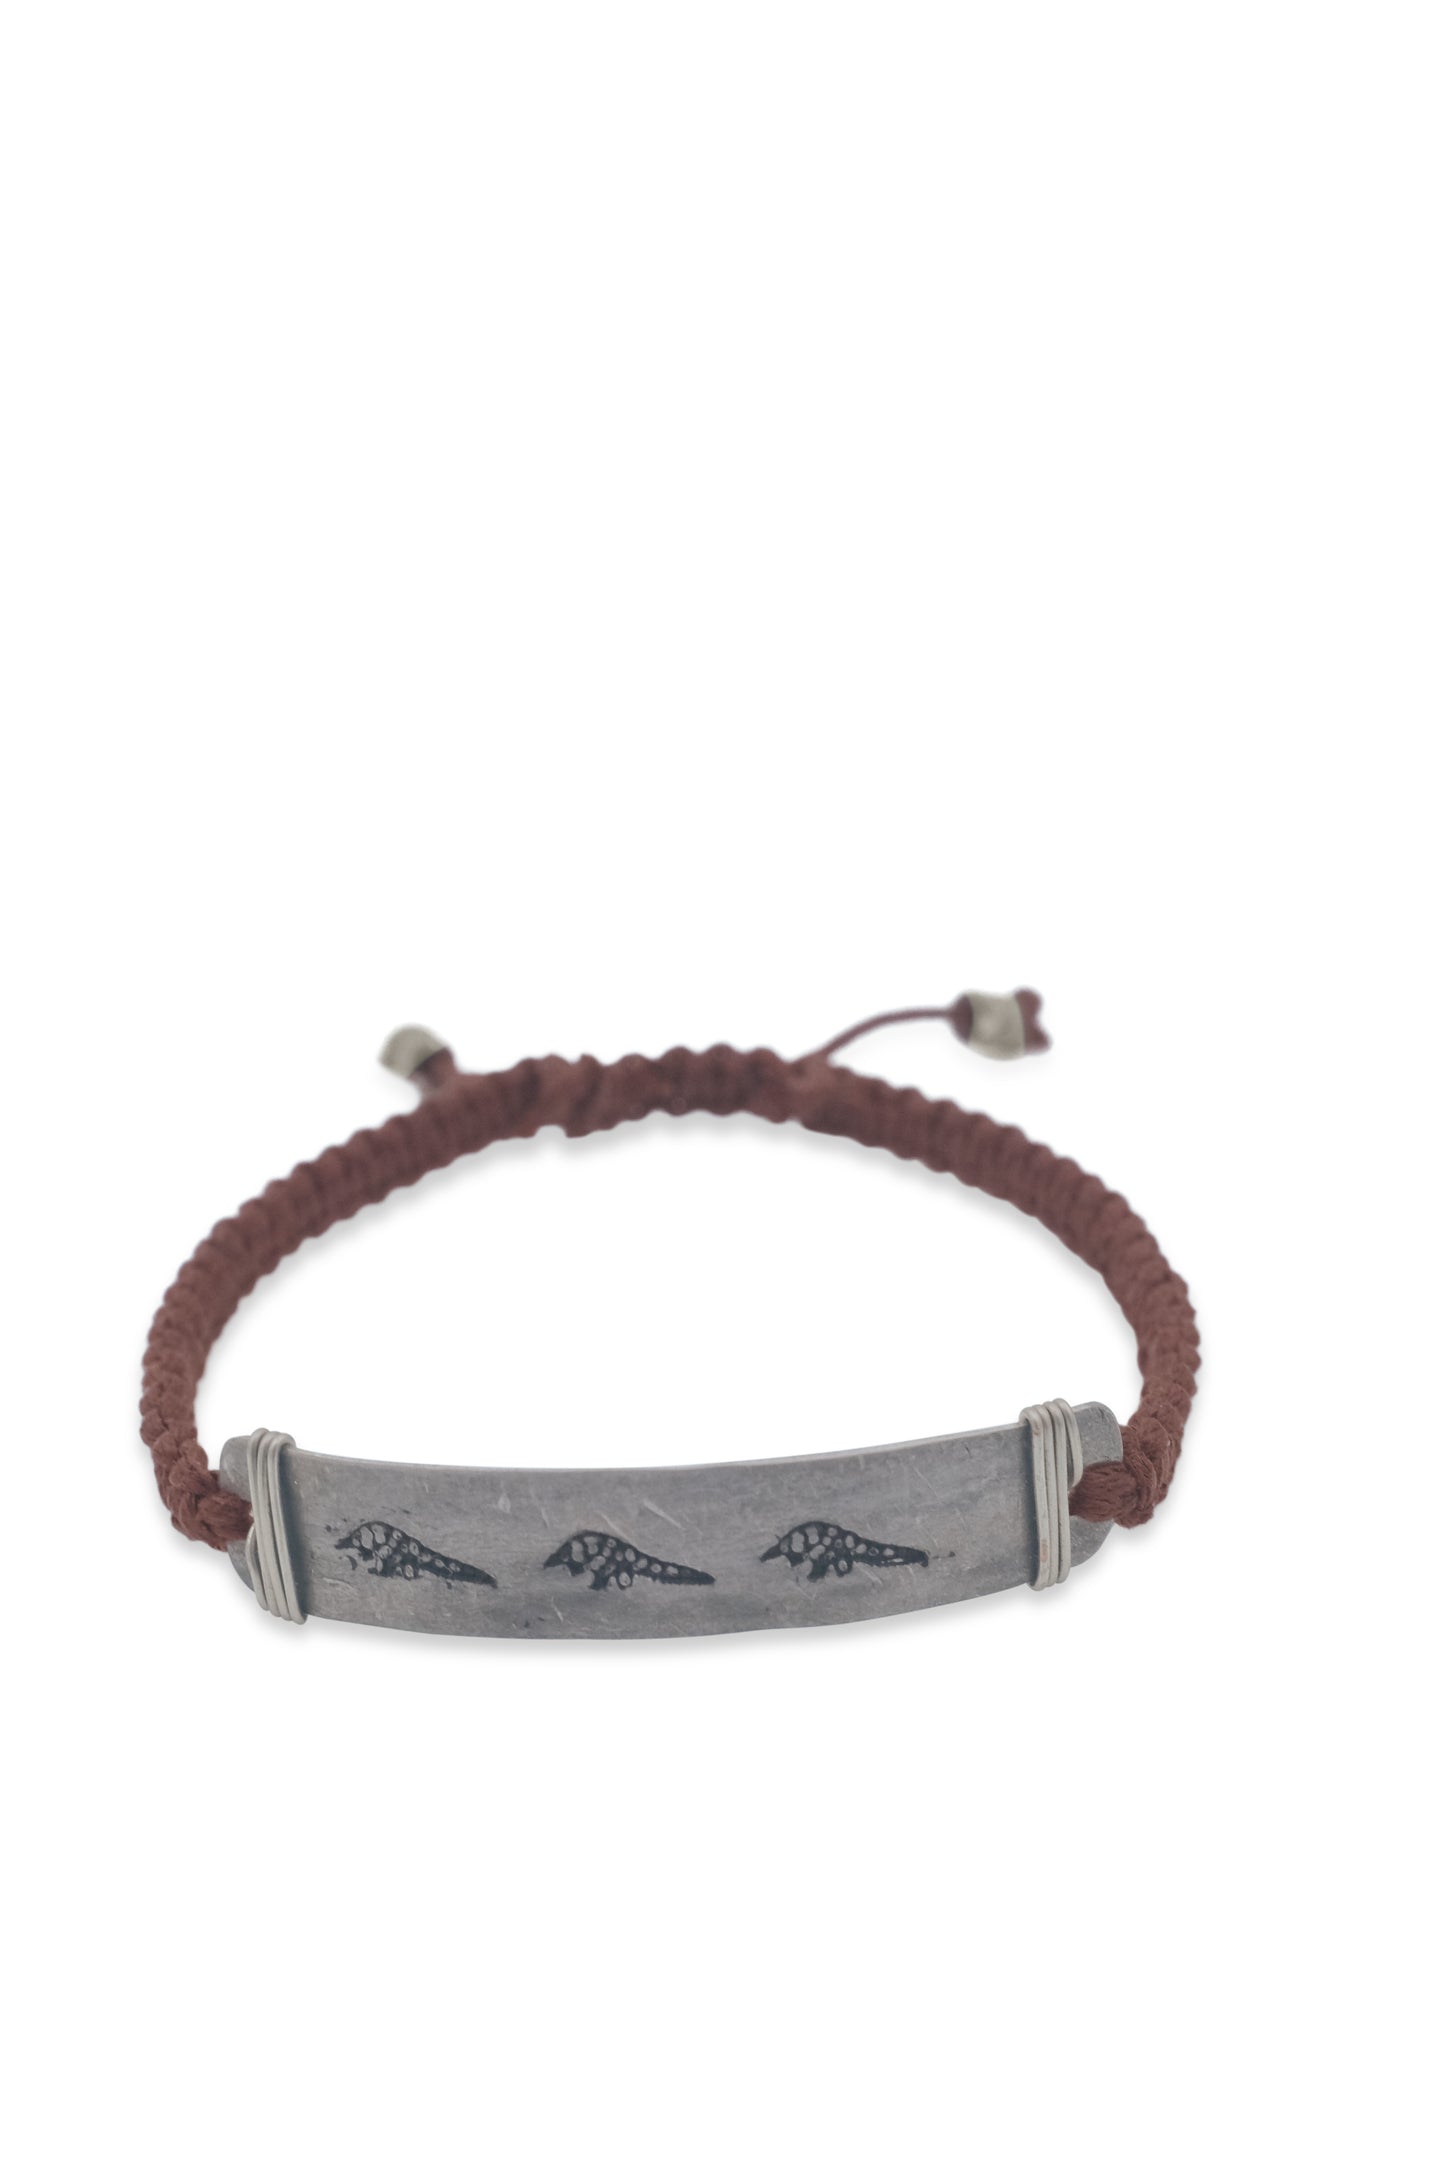 Hammered snare bracelet with pangolin stamp